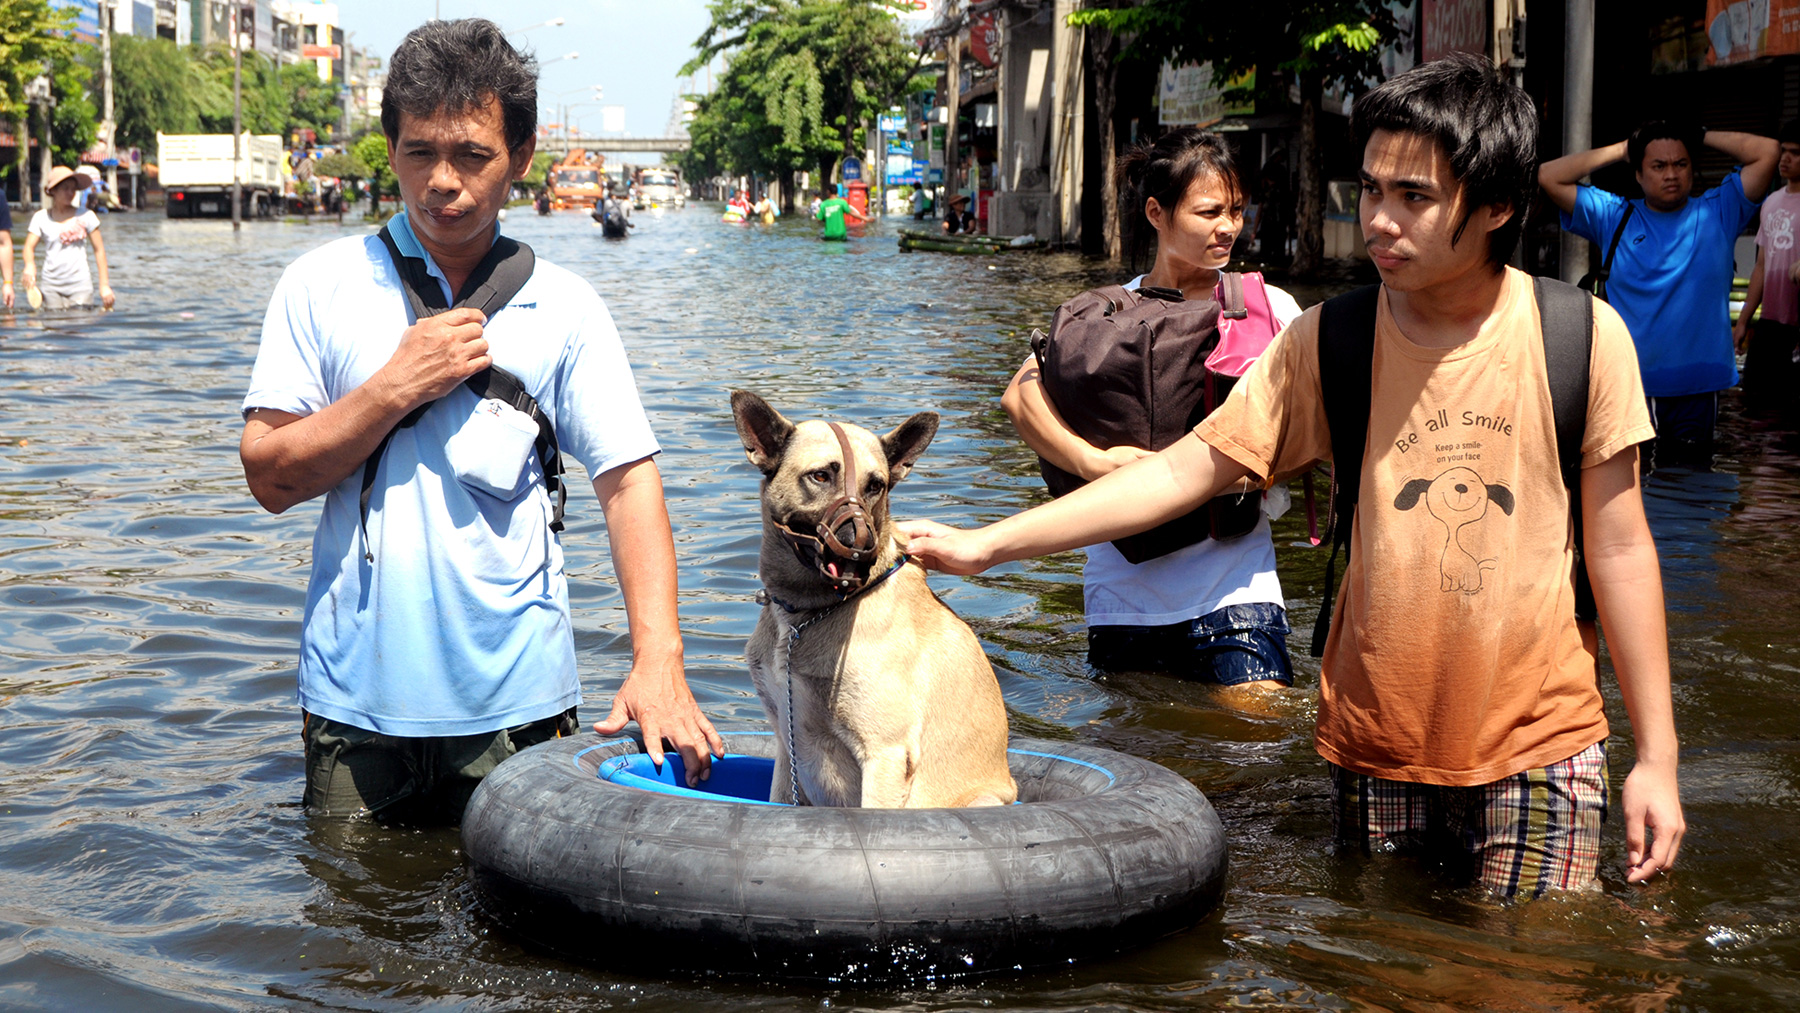 Citizens rescue a dog from the flood of November 2, 2011 in Bangkok, Thailand.